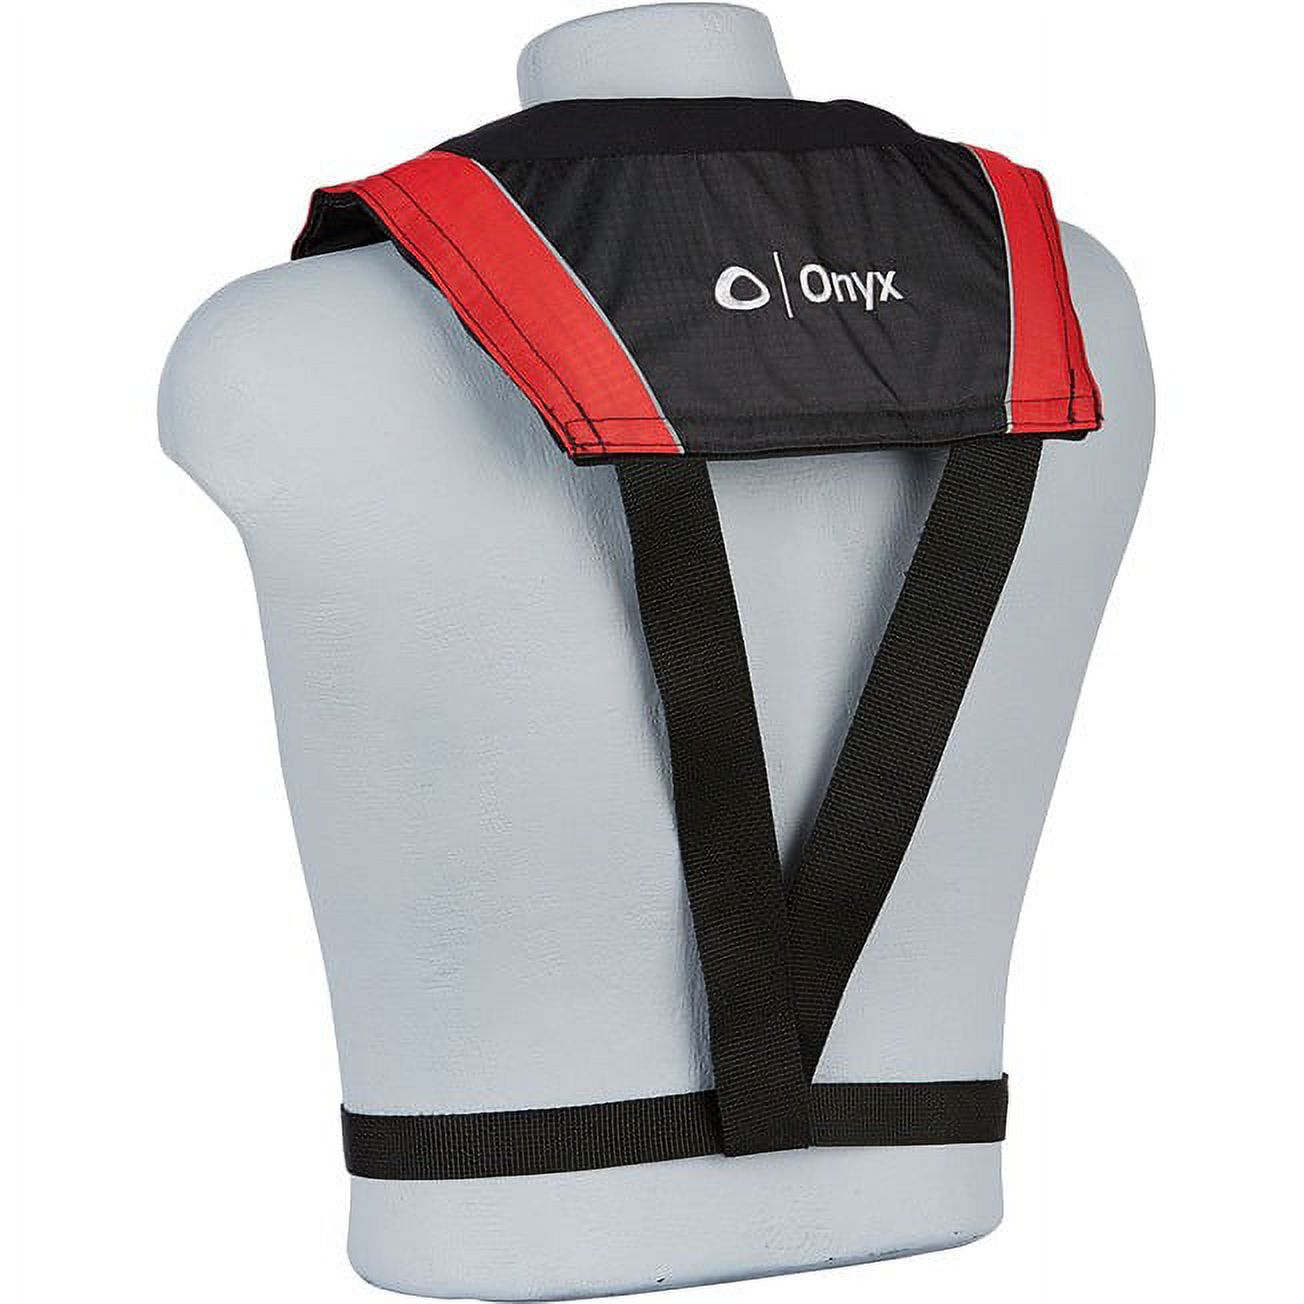 Onyx #131000-100-004-15 M-24 Manual Inflatable Life Jacket, Red - image 3 of 5